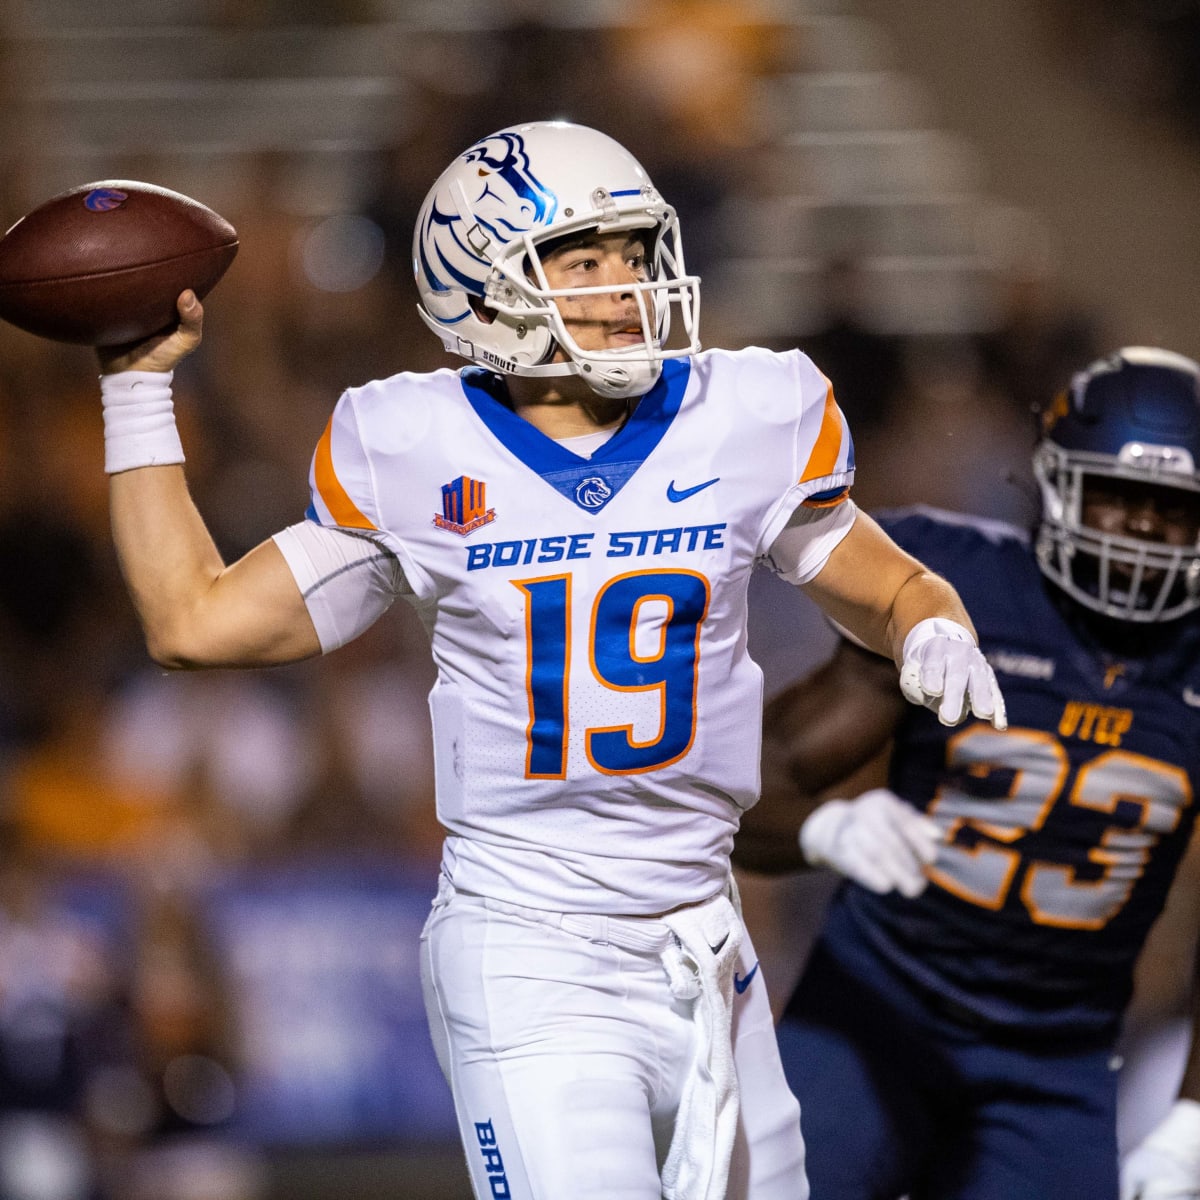 2023 Transfer Portal QBs, and Where They Could End Up - Mike Farrell Sports